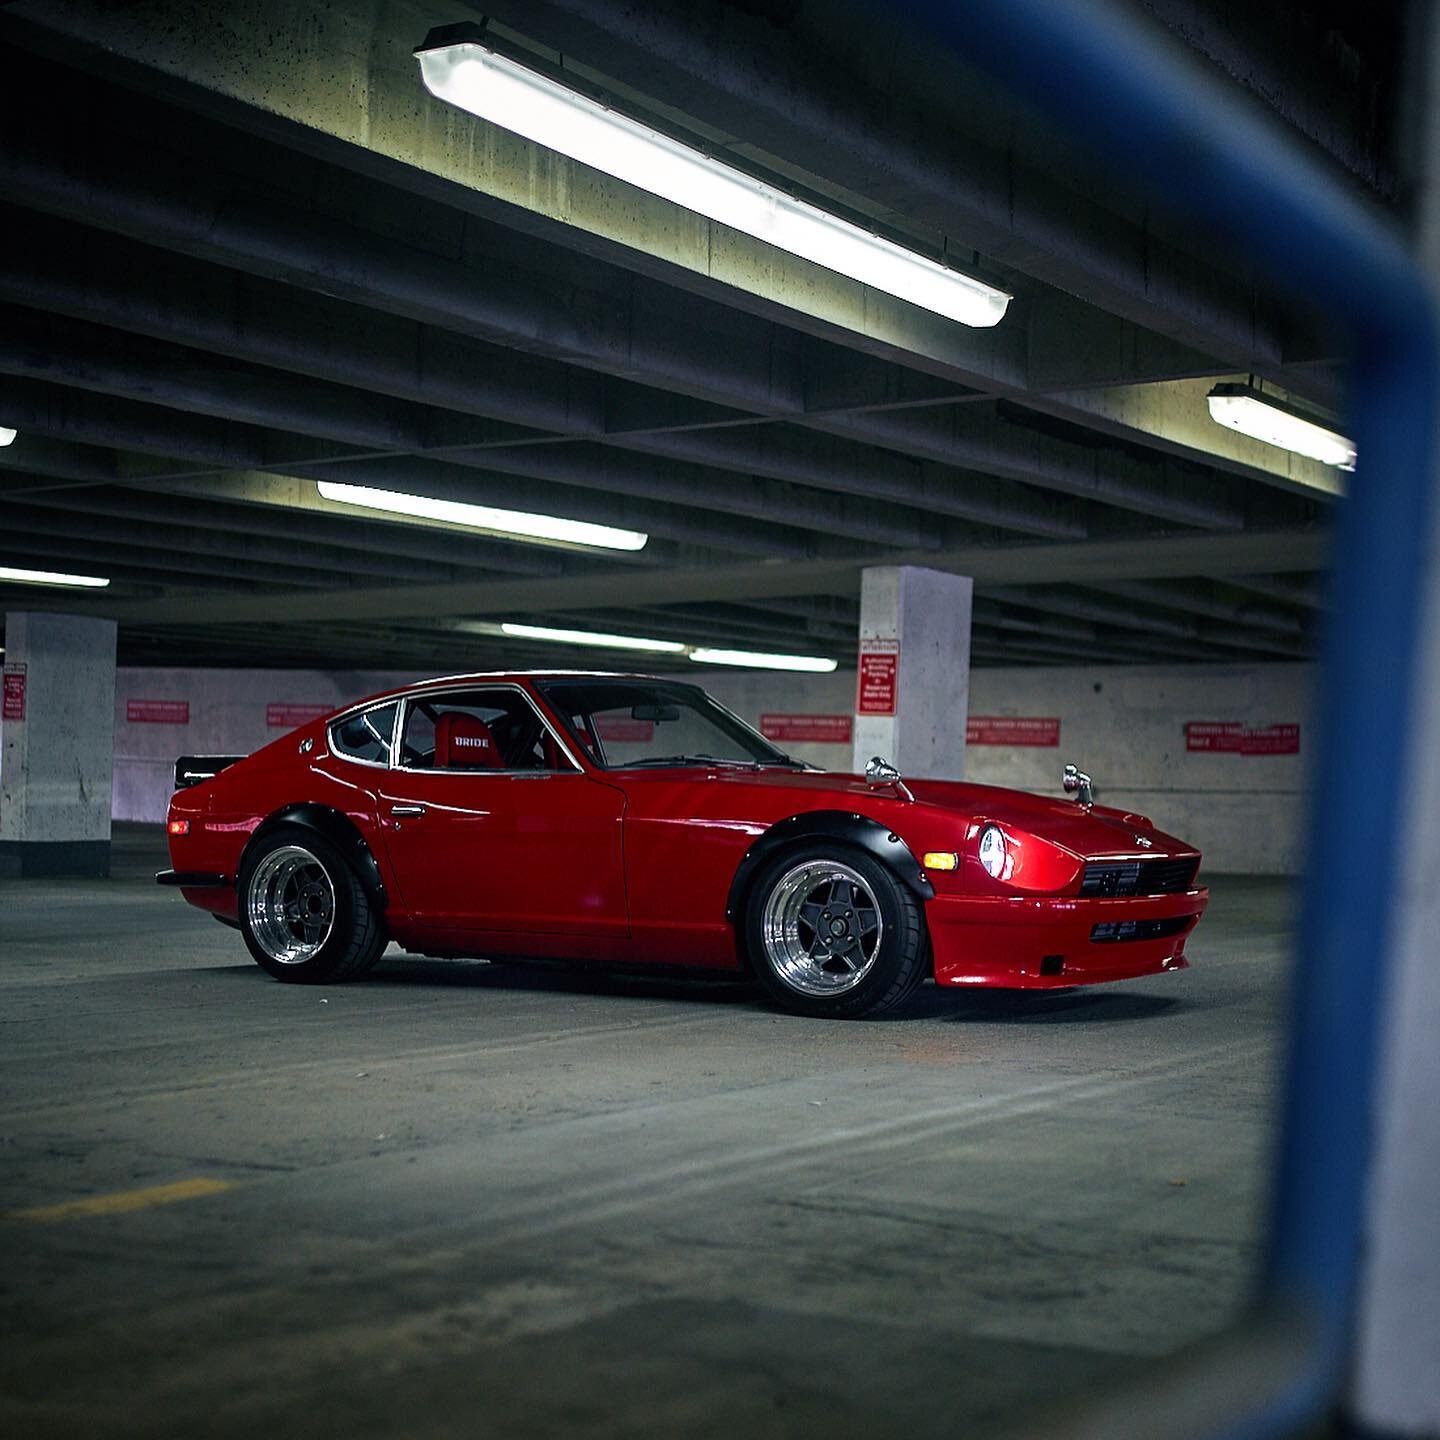 1/3 May need to get back to TN &amp; GA and link with the homies and do some car related projects. 

📸: @thecarcreative 
💻: @52visuals 
🚗: 1975 Datsun 280z

Thanks to @thecarcreative for the images to edit! He&rsquo;s a great car photographer defi